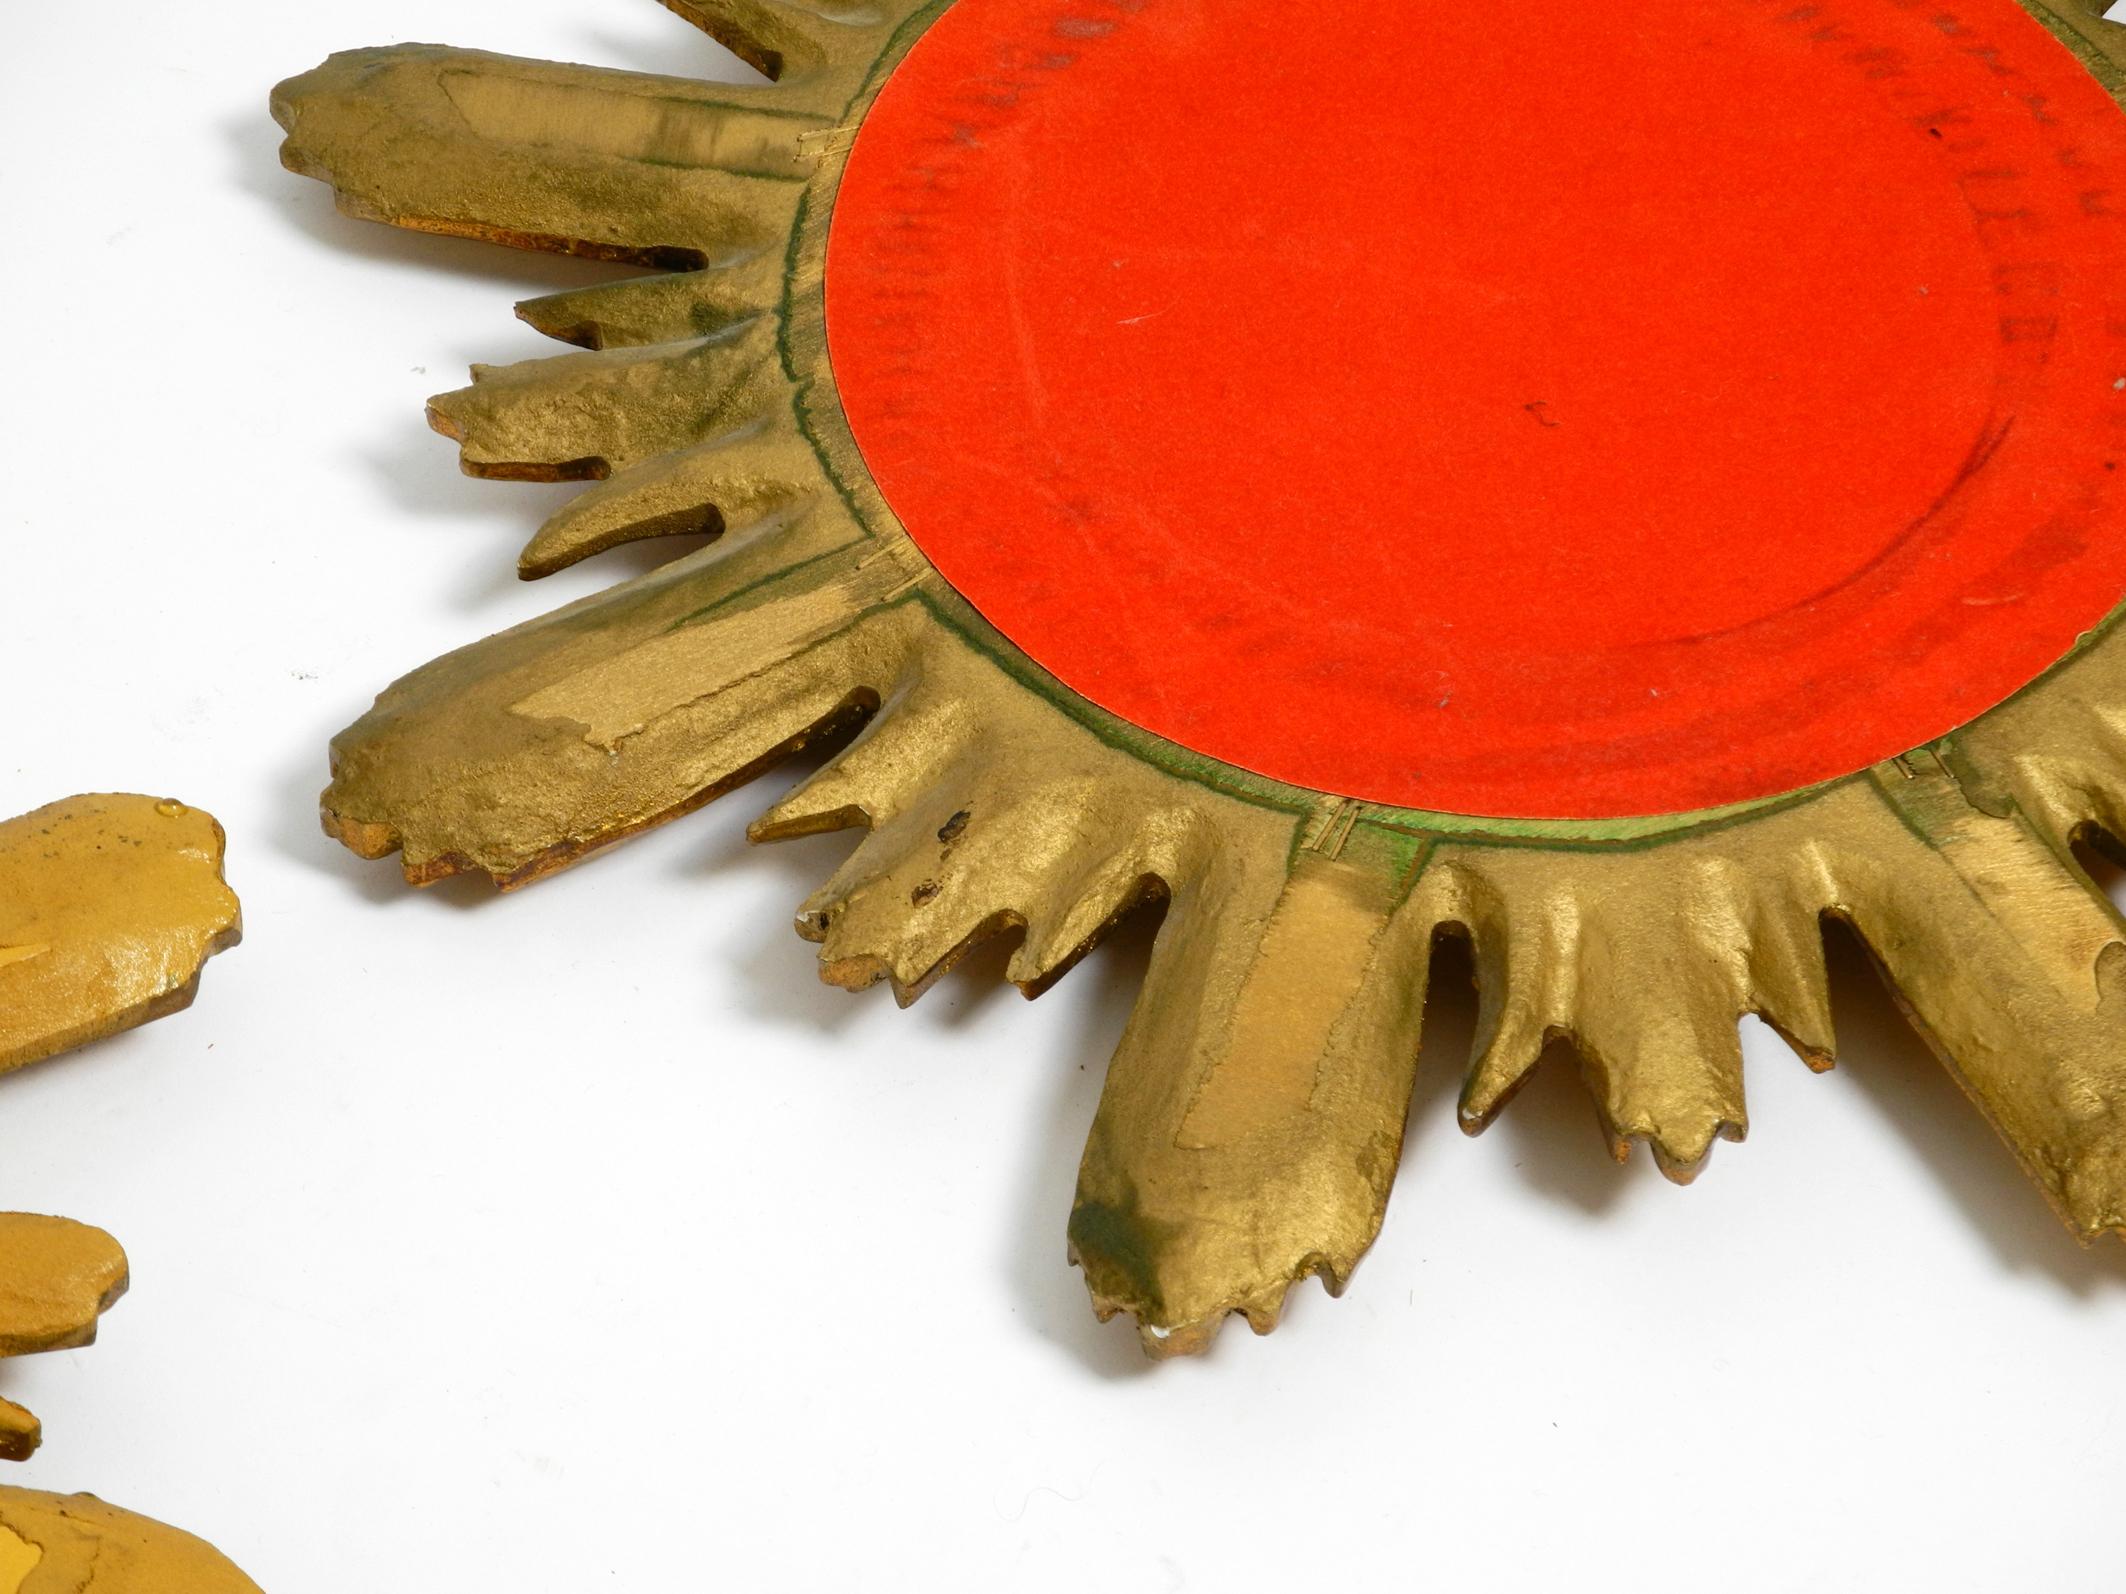 Pair of gold-plated mid-century sunburst wall mirrors made of wood and resin 6